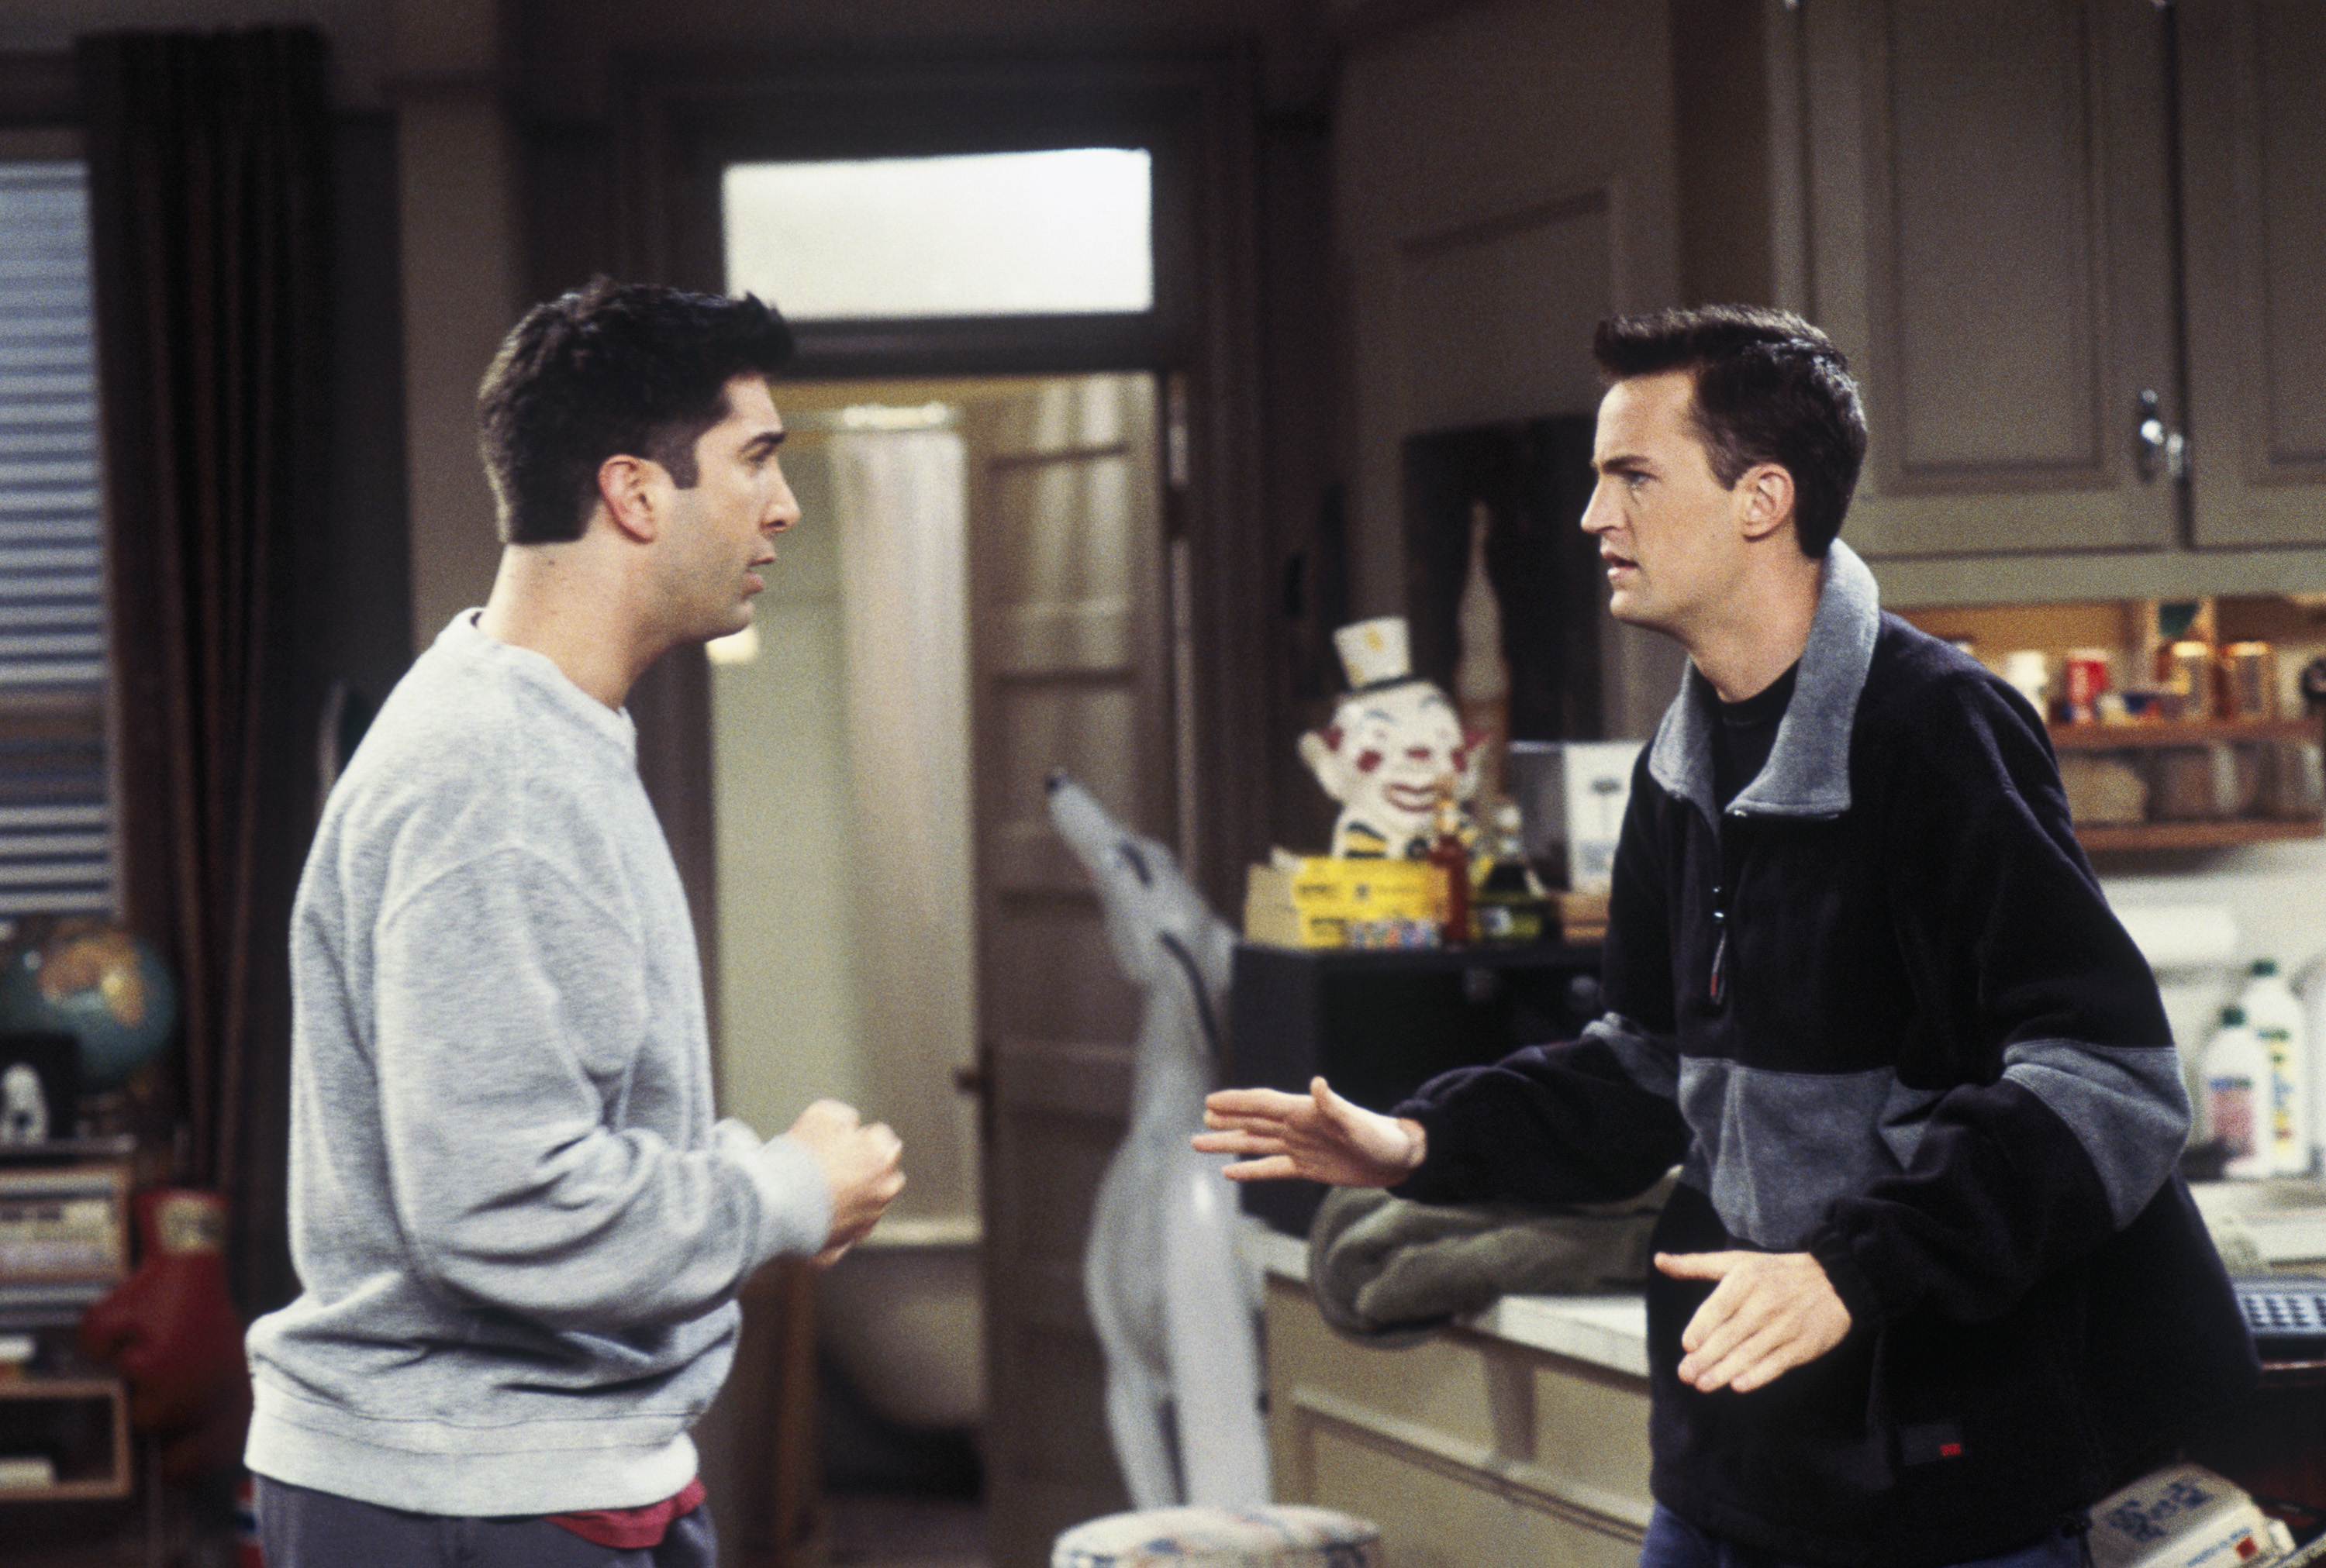 David Schwimmer and Matthew Perry as their characters in an episode of "Friends" in 1997 | Source: Getty Images